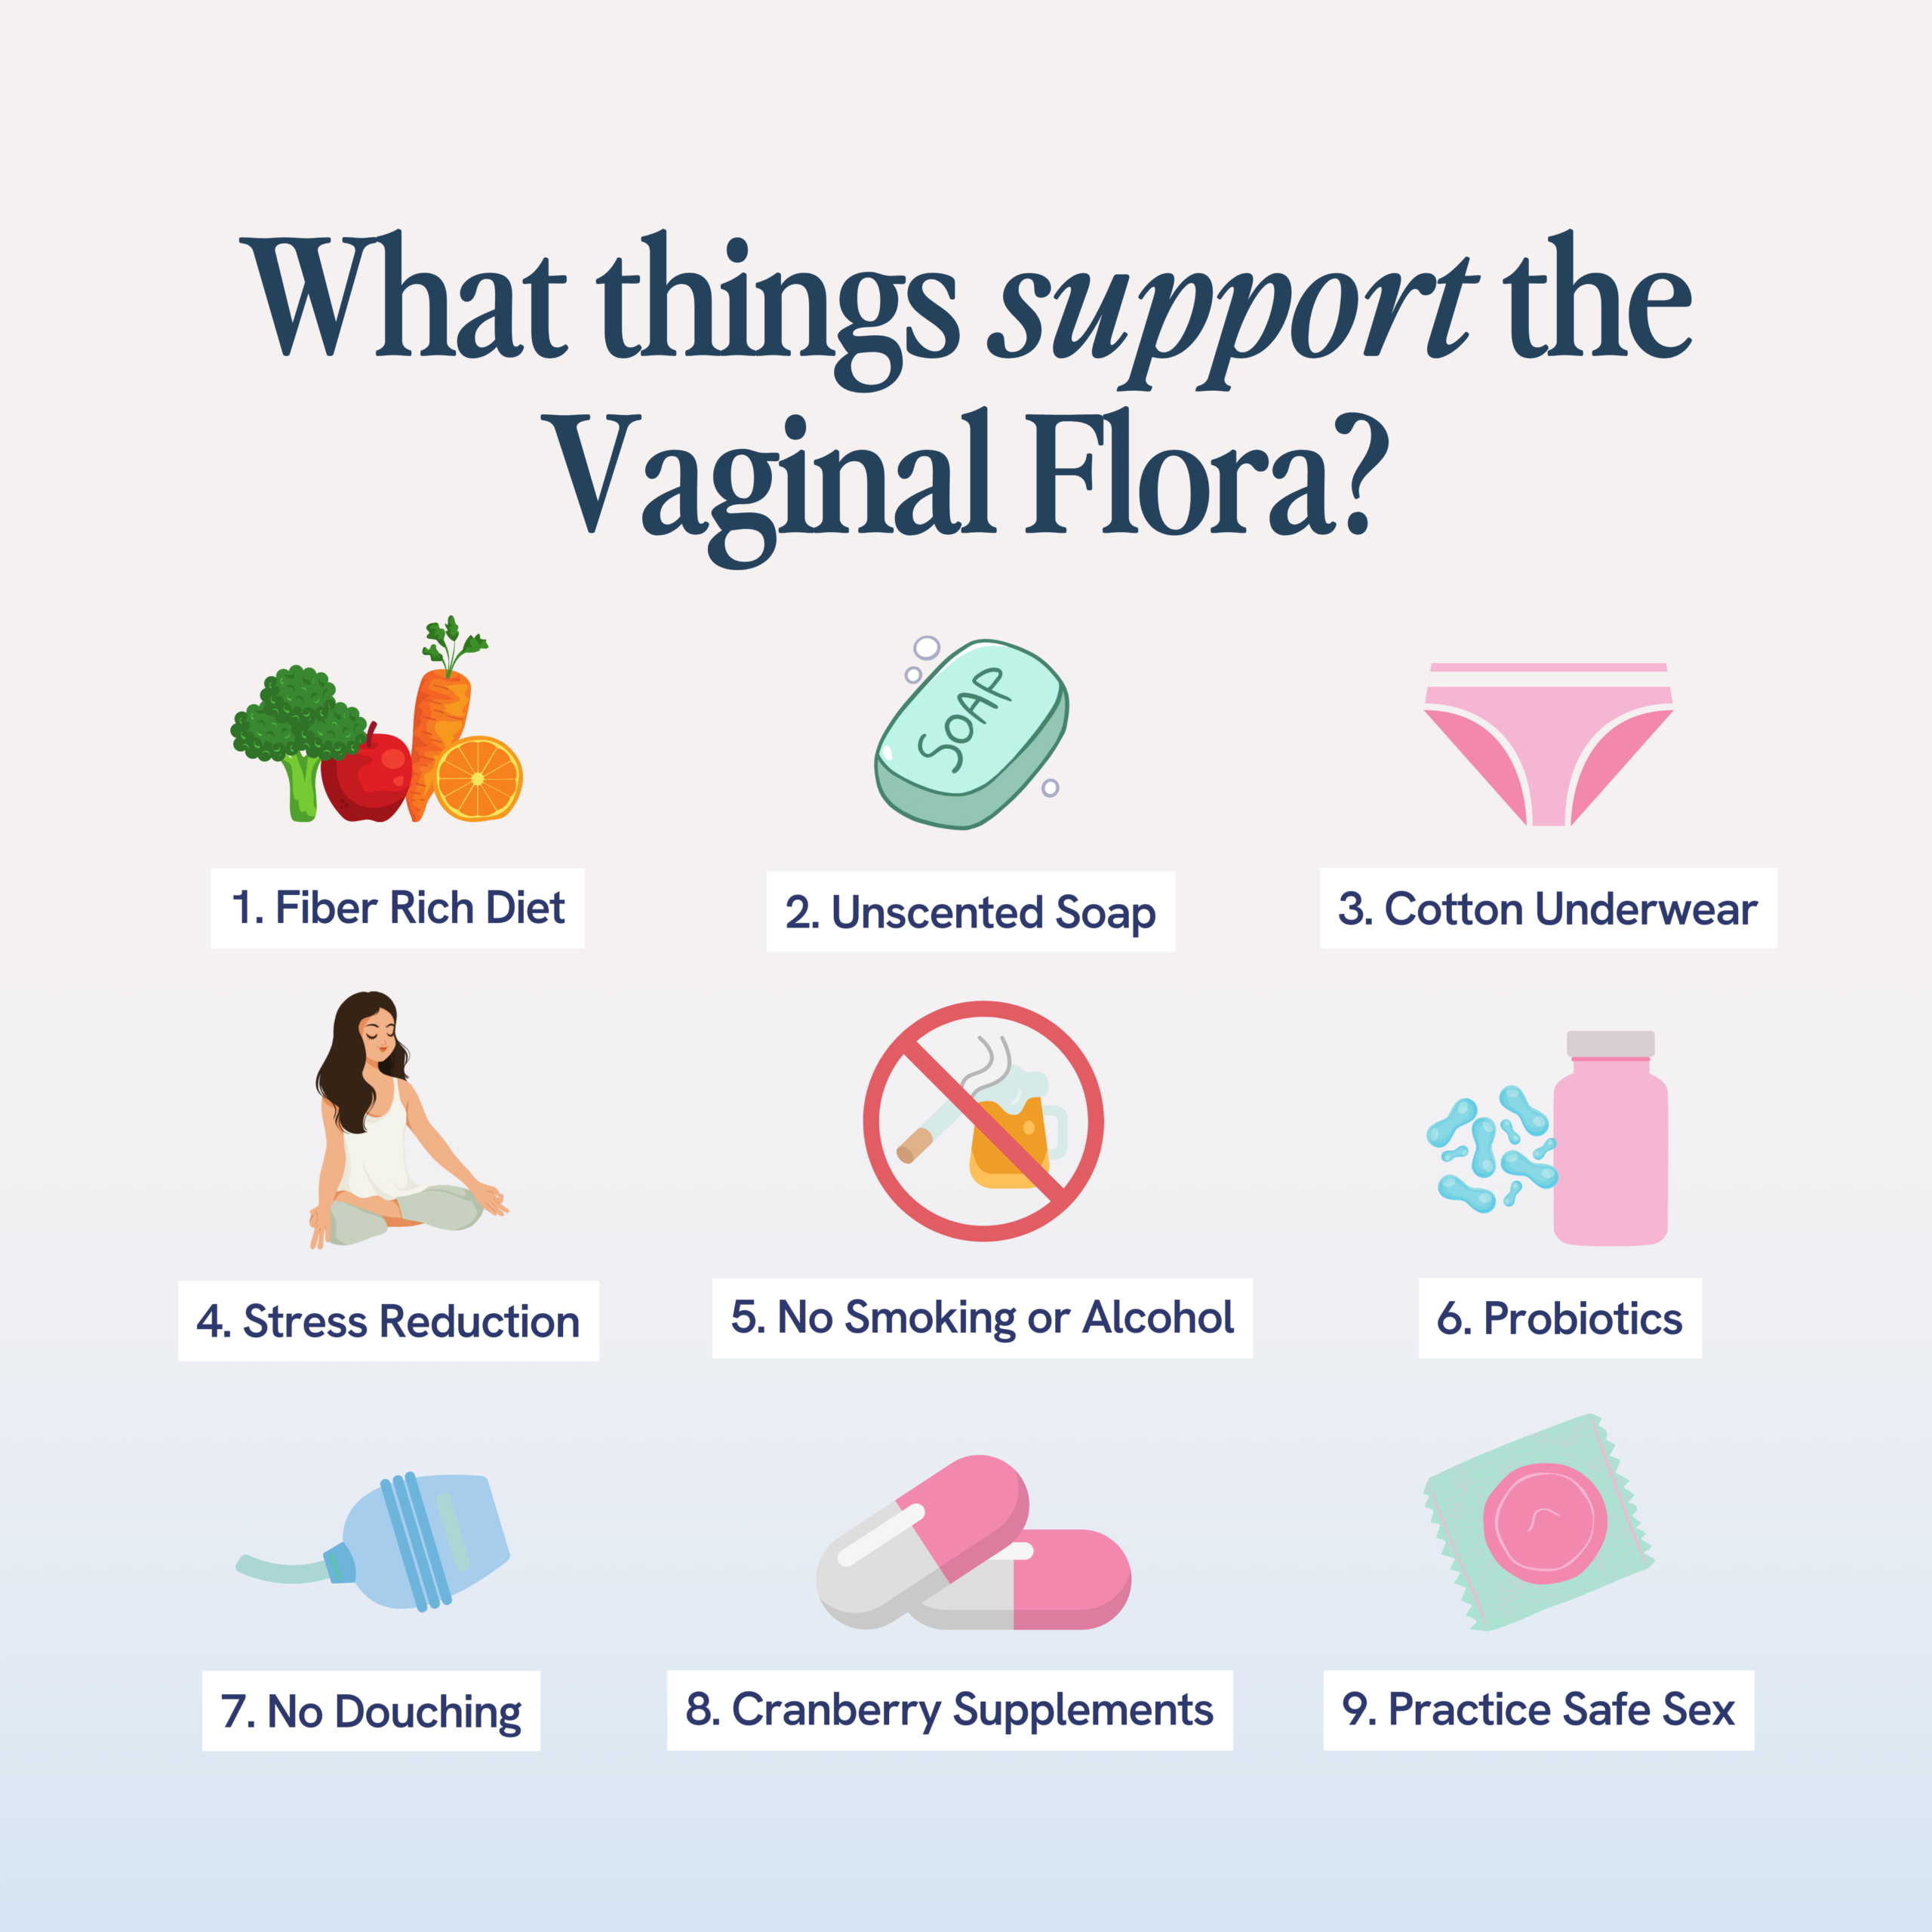 The image is a visual list of nine things that support healthy vaginal flora, including a fiber-rich diet, unscented soap, cotton underwear, stress reduction, avoiding smoking and alcohol, probiotics, not douching, cranberry supplements, and practicing safe sex. Each item is represented by a colorful icon, like vegetables for a fiber-rich diet, a soap bar for unscented soap, and a condom for safe sex